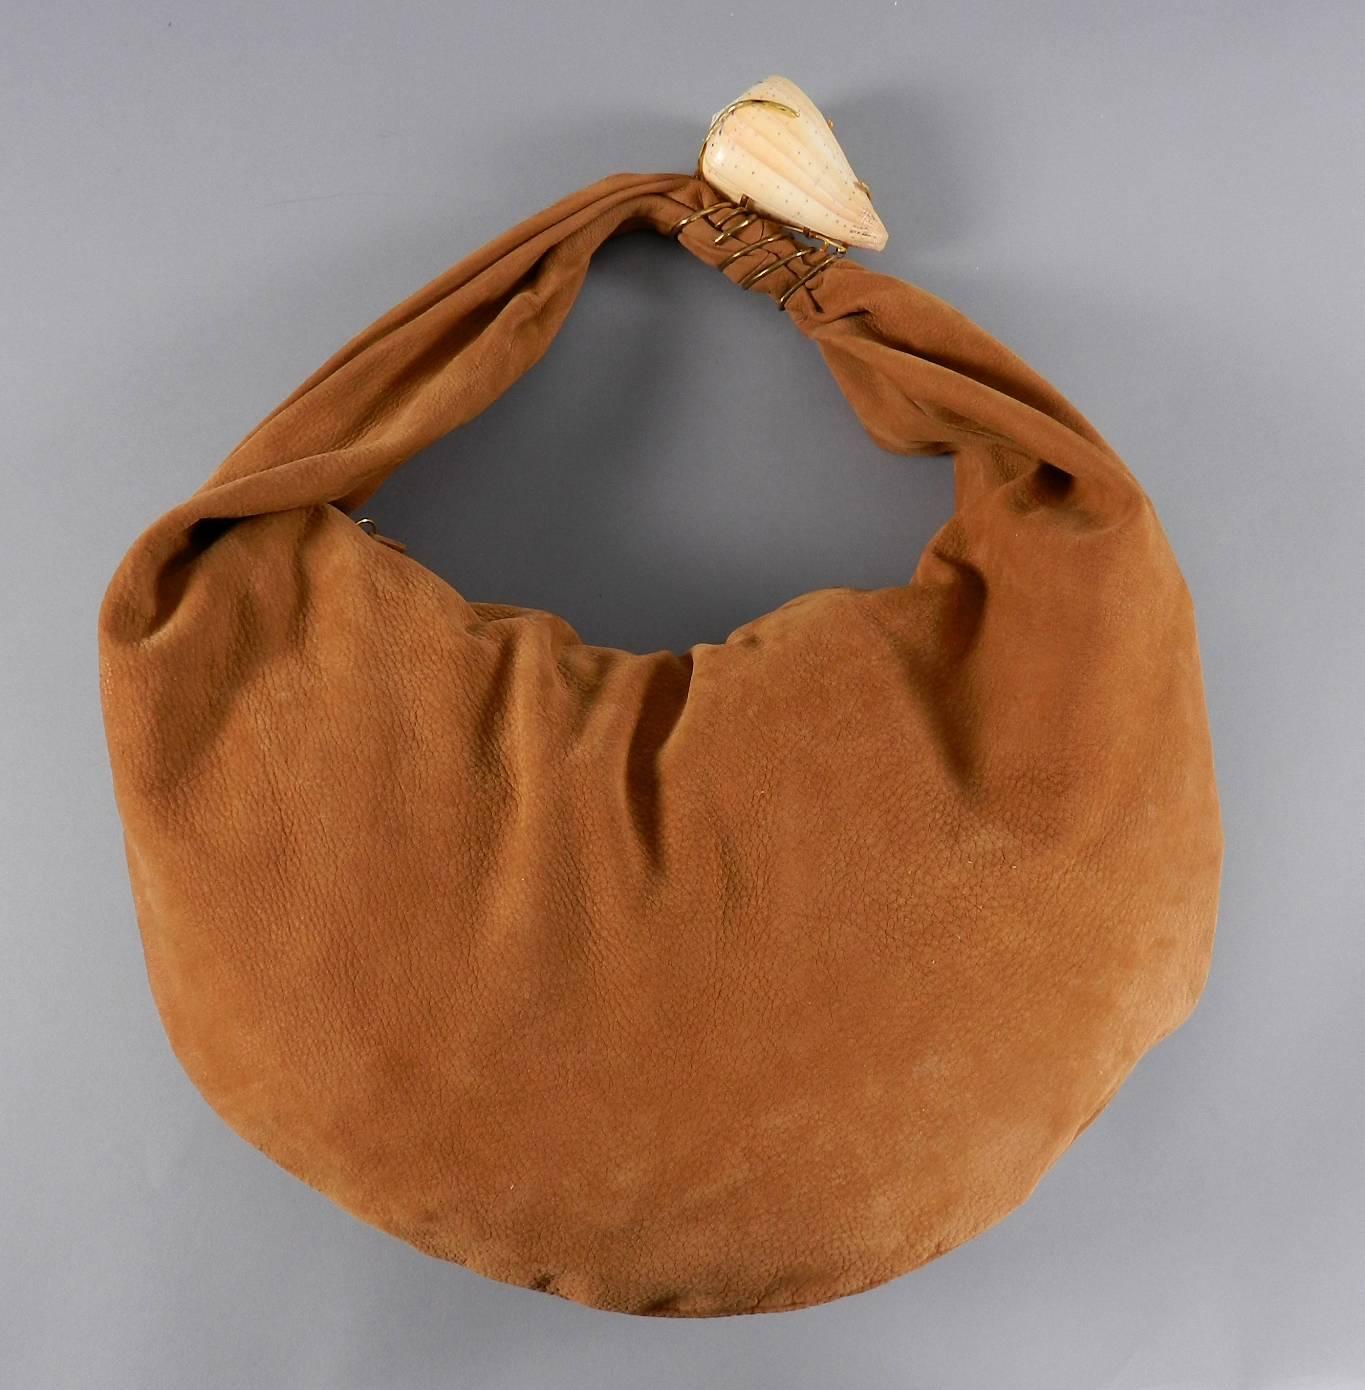 YSL Yves Saint Laurent haute couture label tan leather hobo bag with shell accent.  Excellent condition. Circa late 1990’s. Body of bag measures approximately 16 x 10.5” with a 9” drop.

We ship worldwide.  Canadian residents pay sales tax based